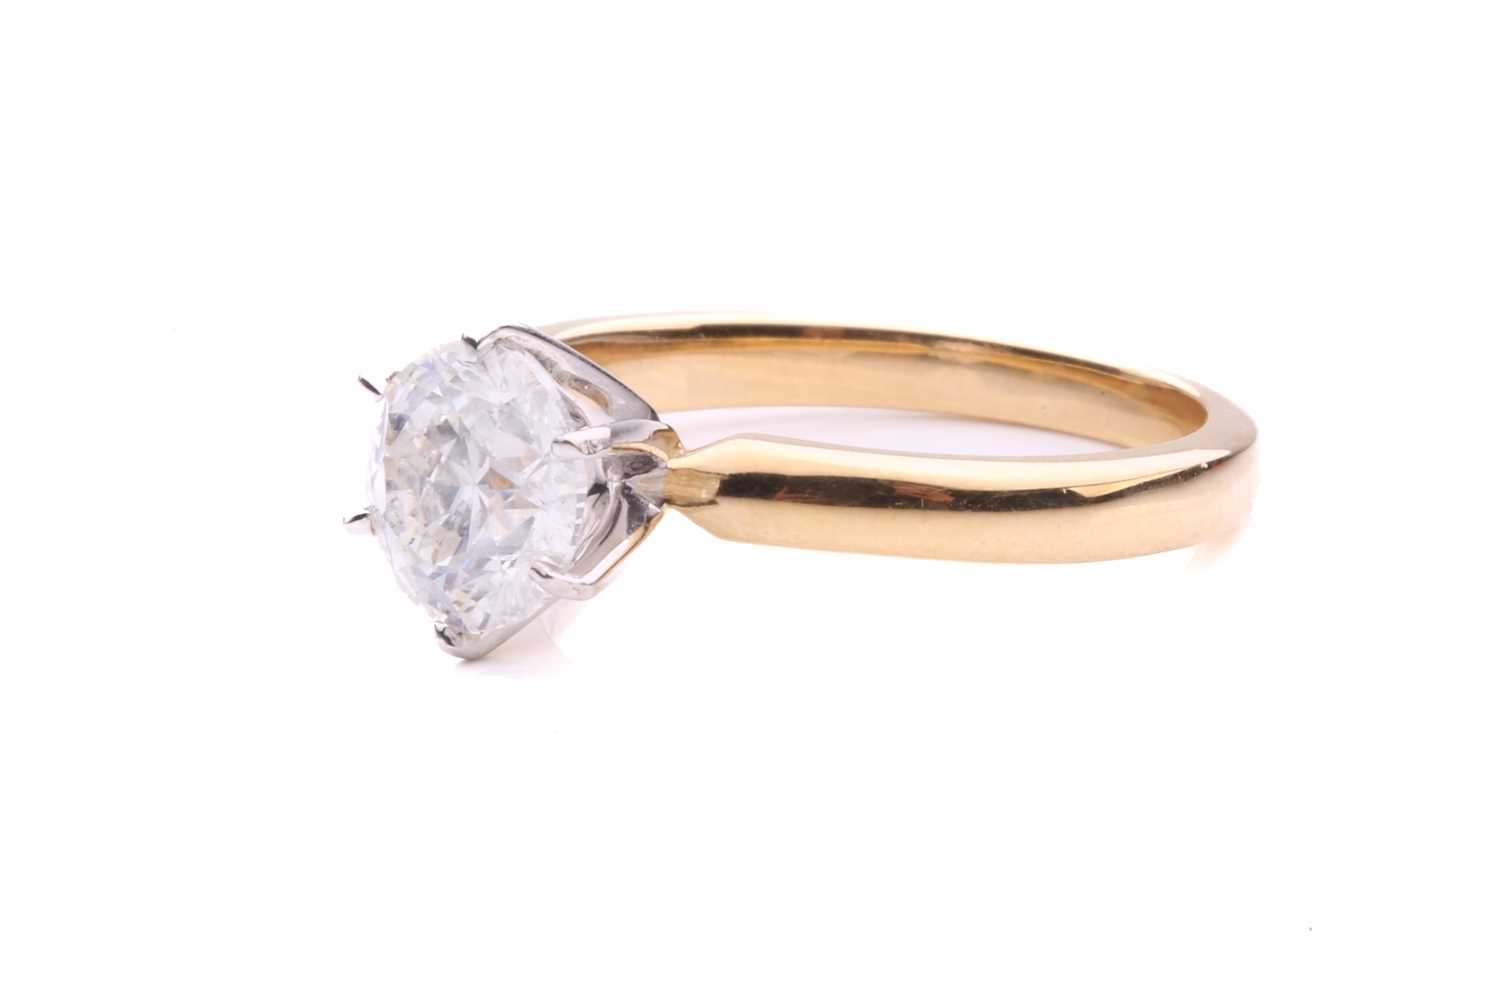 A diamond solitaire ring in 18ct gold, centred with a brilliant-cut diamond of 6.7 mm with an - Image 2 of 5